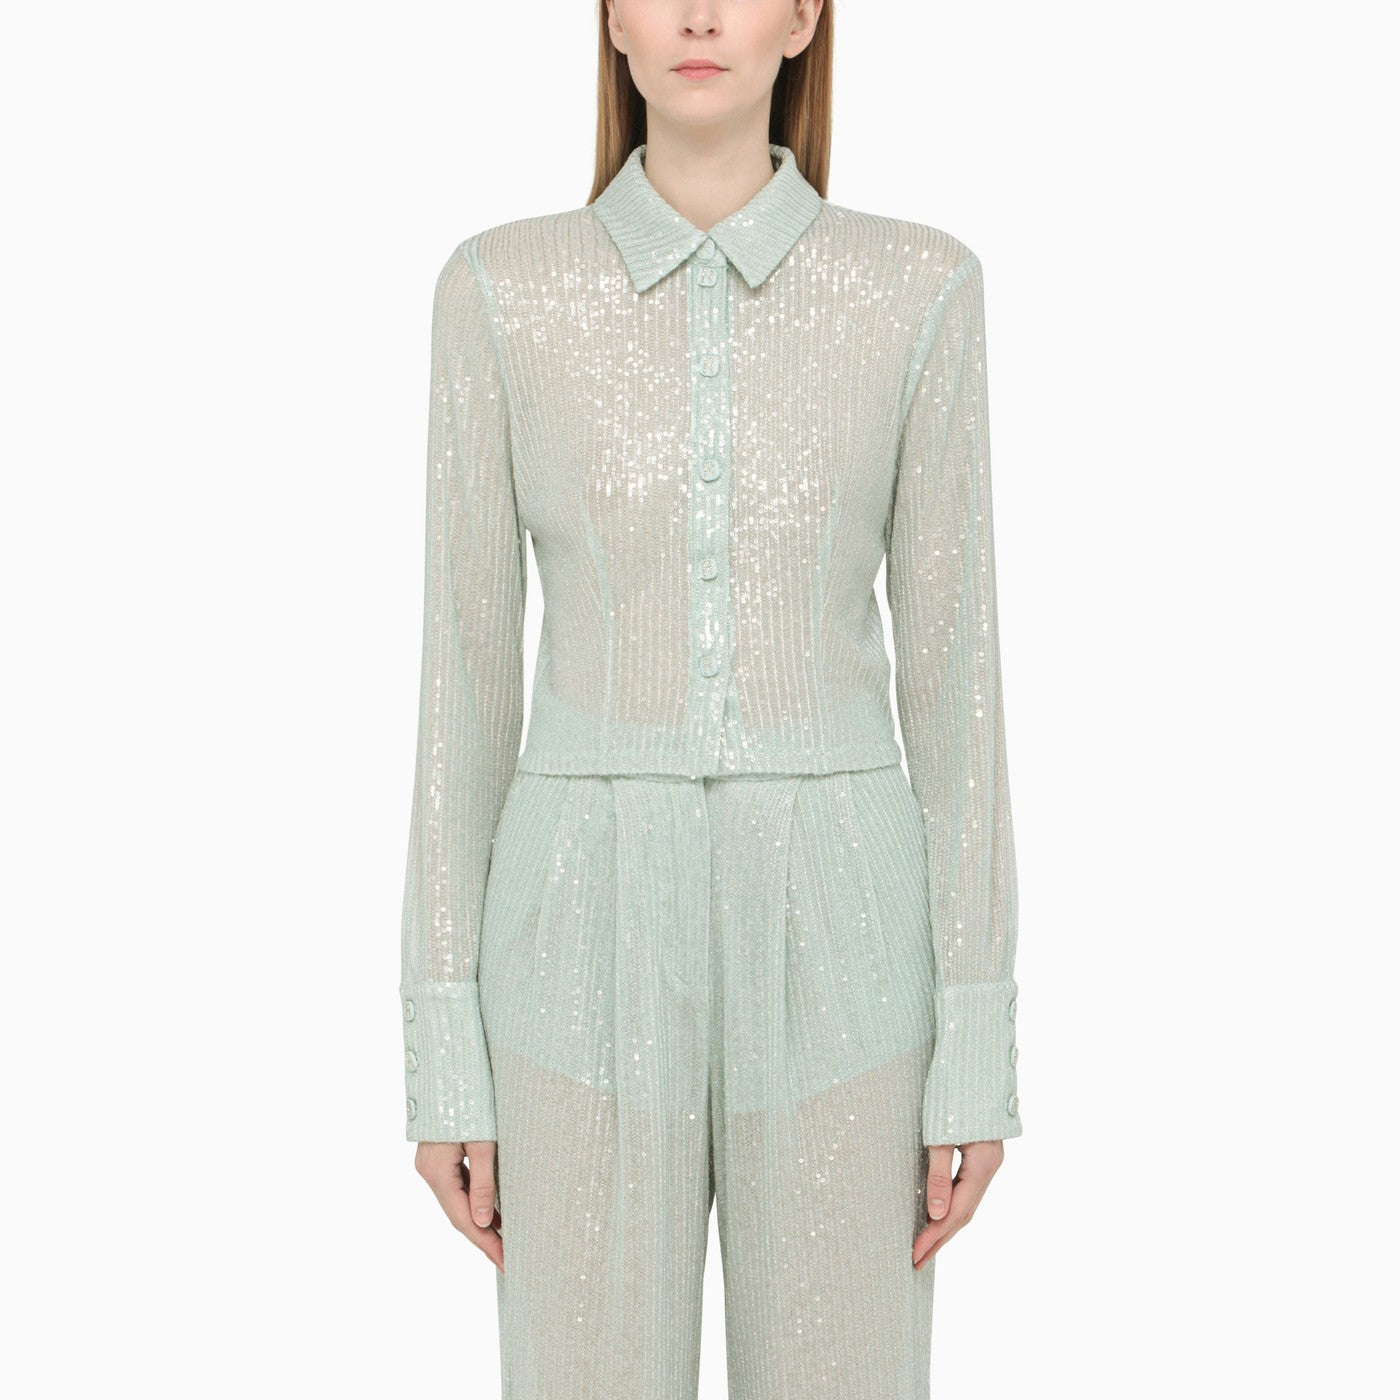 ROTATE BIRGER CHRISTENSEN ROTATE BIRGER CHRISTENSEN BLUE SHIRT WITH SEQUINS